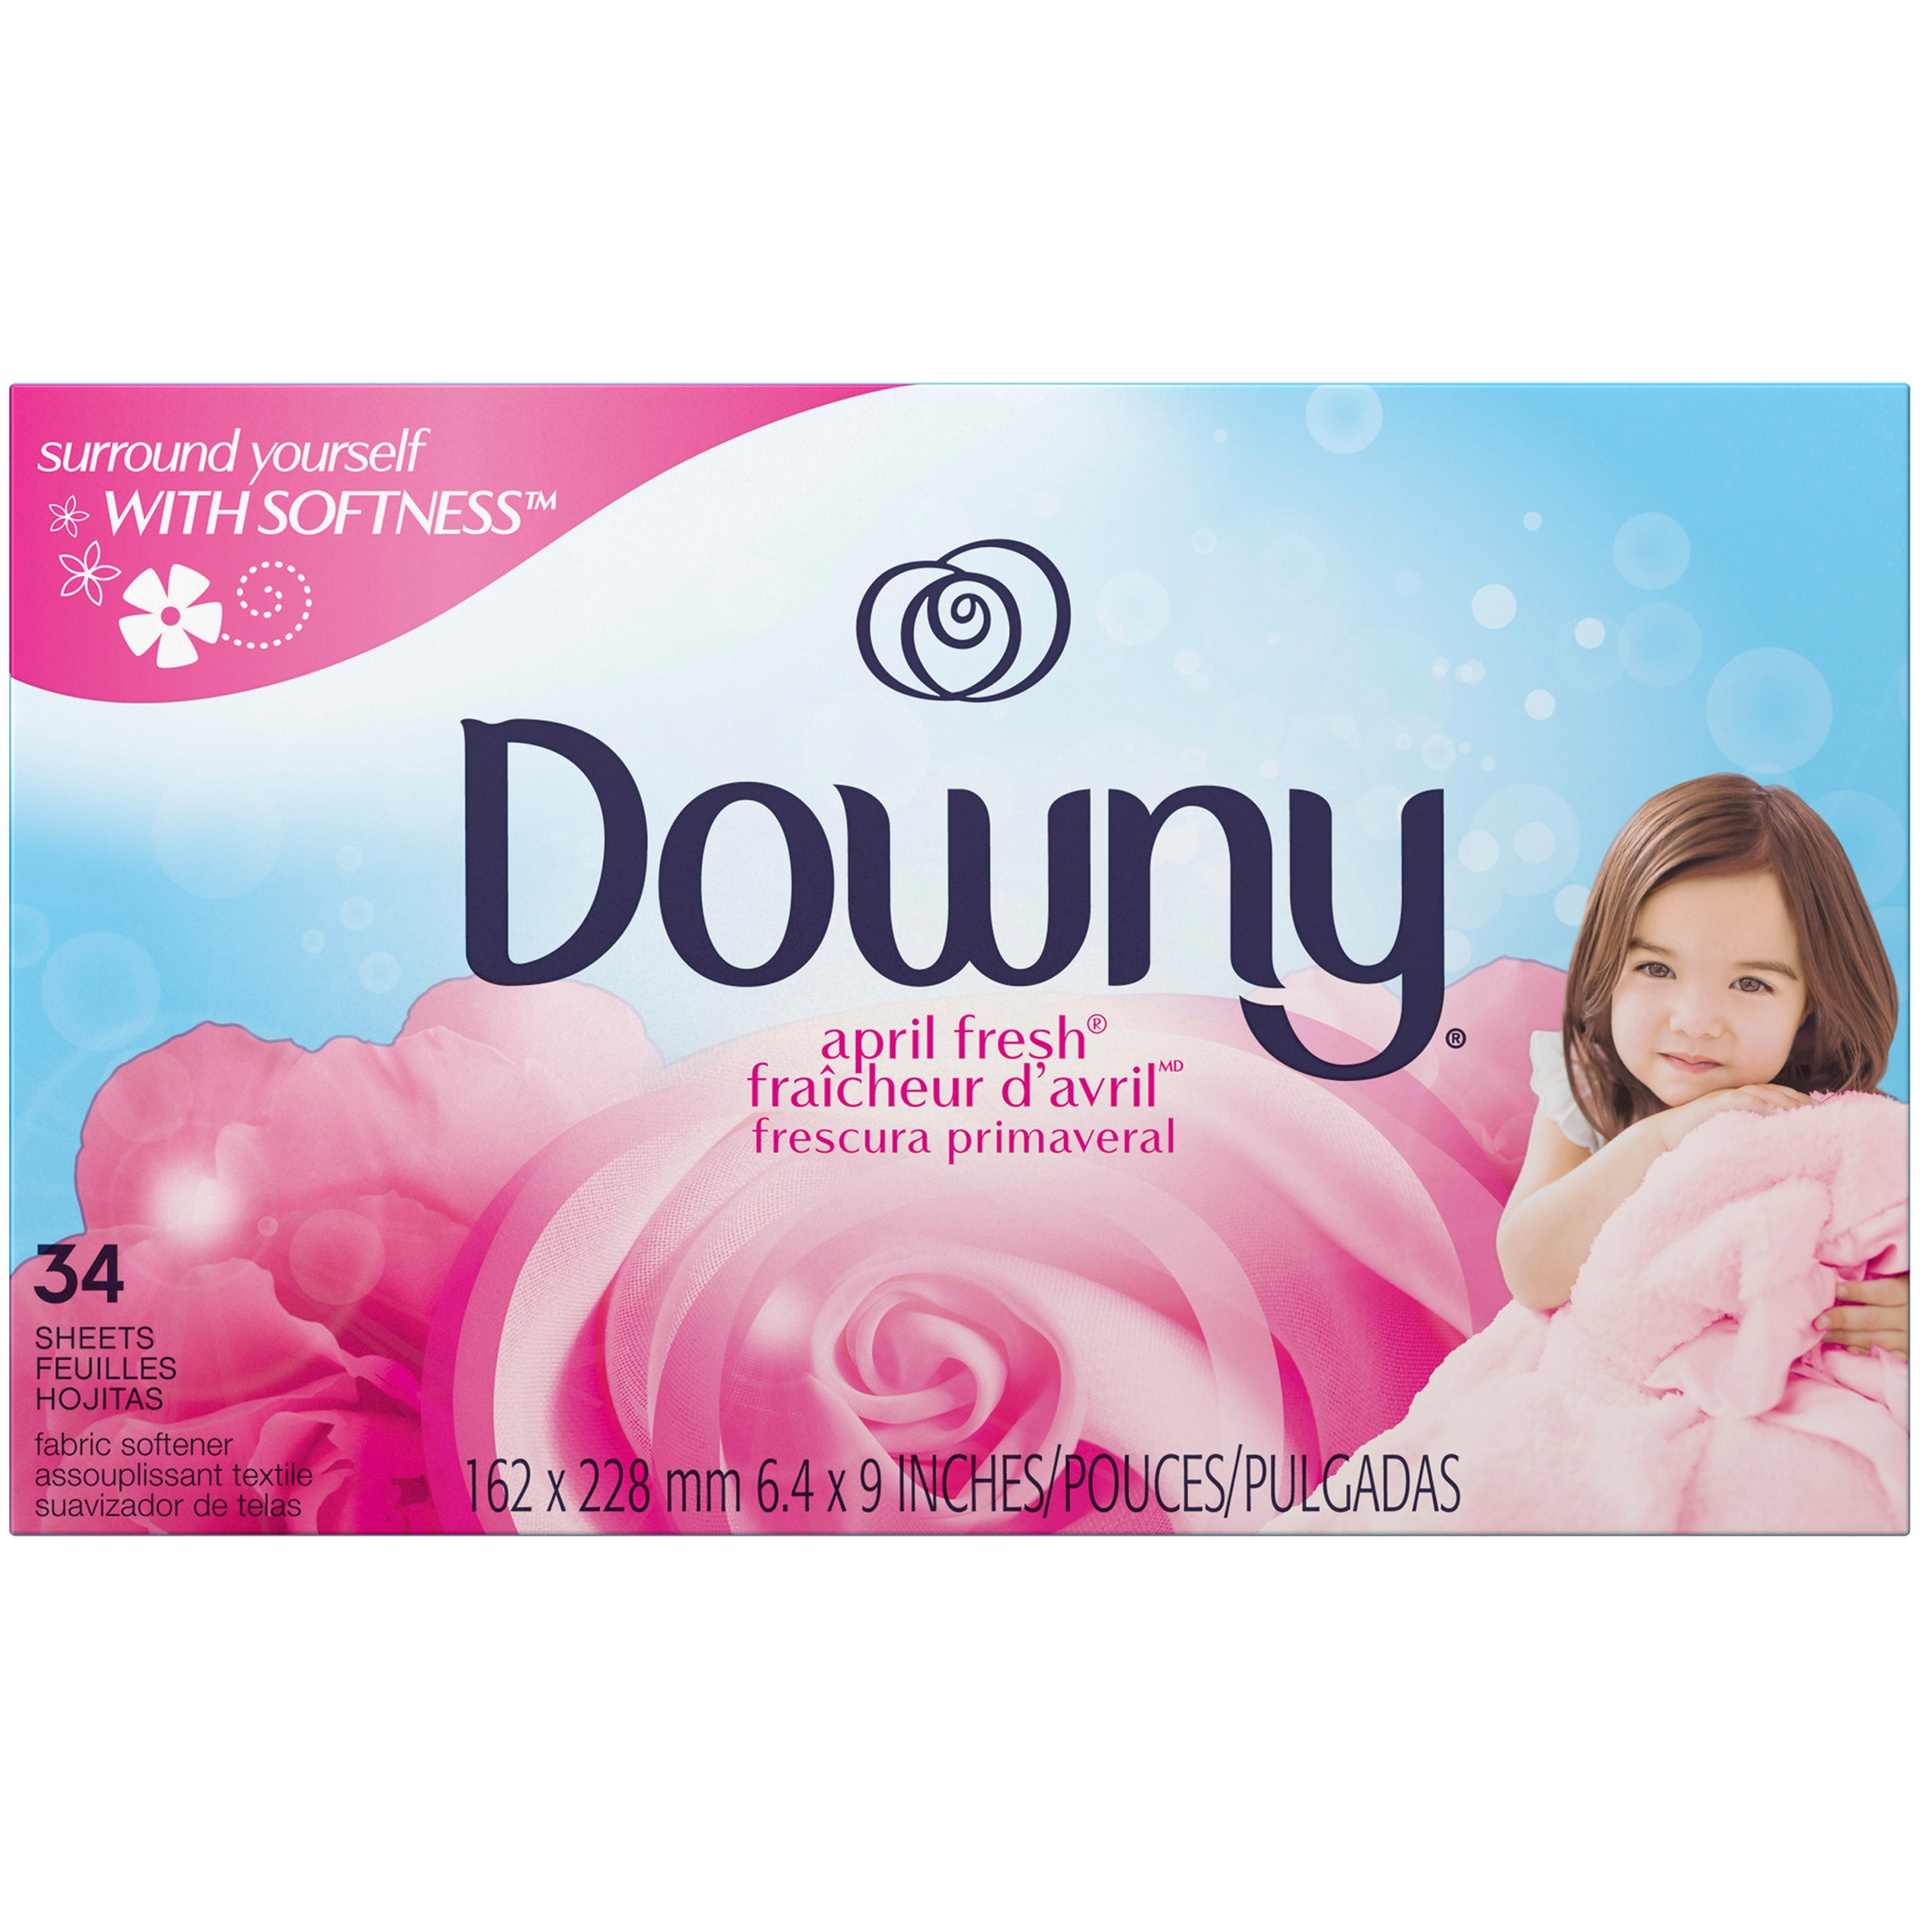 DOWNY DRYER SHEETS - APRIL FRESH (34CT)